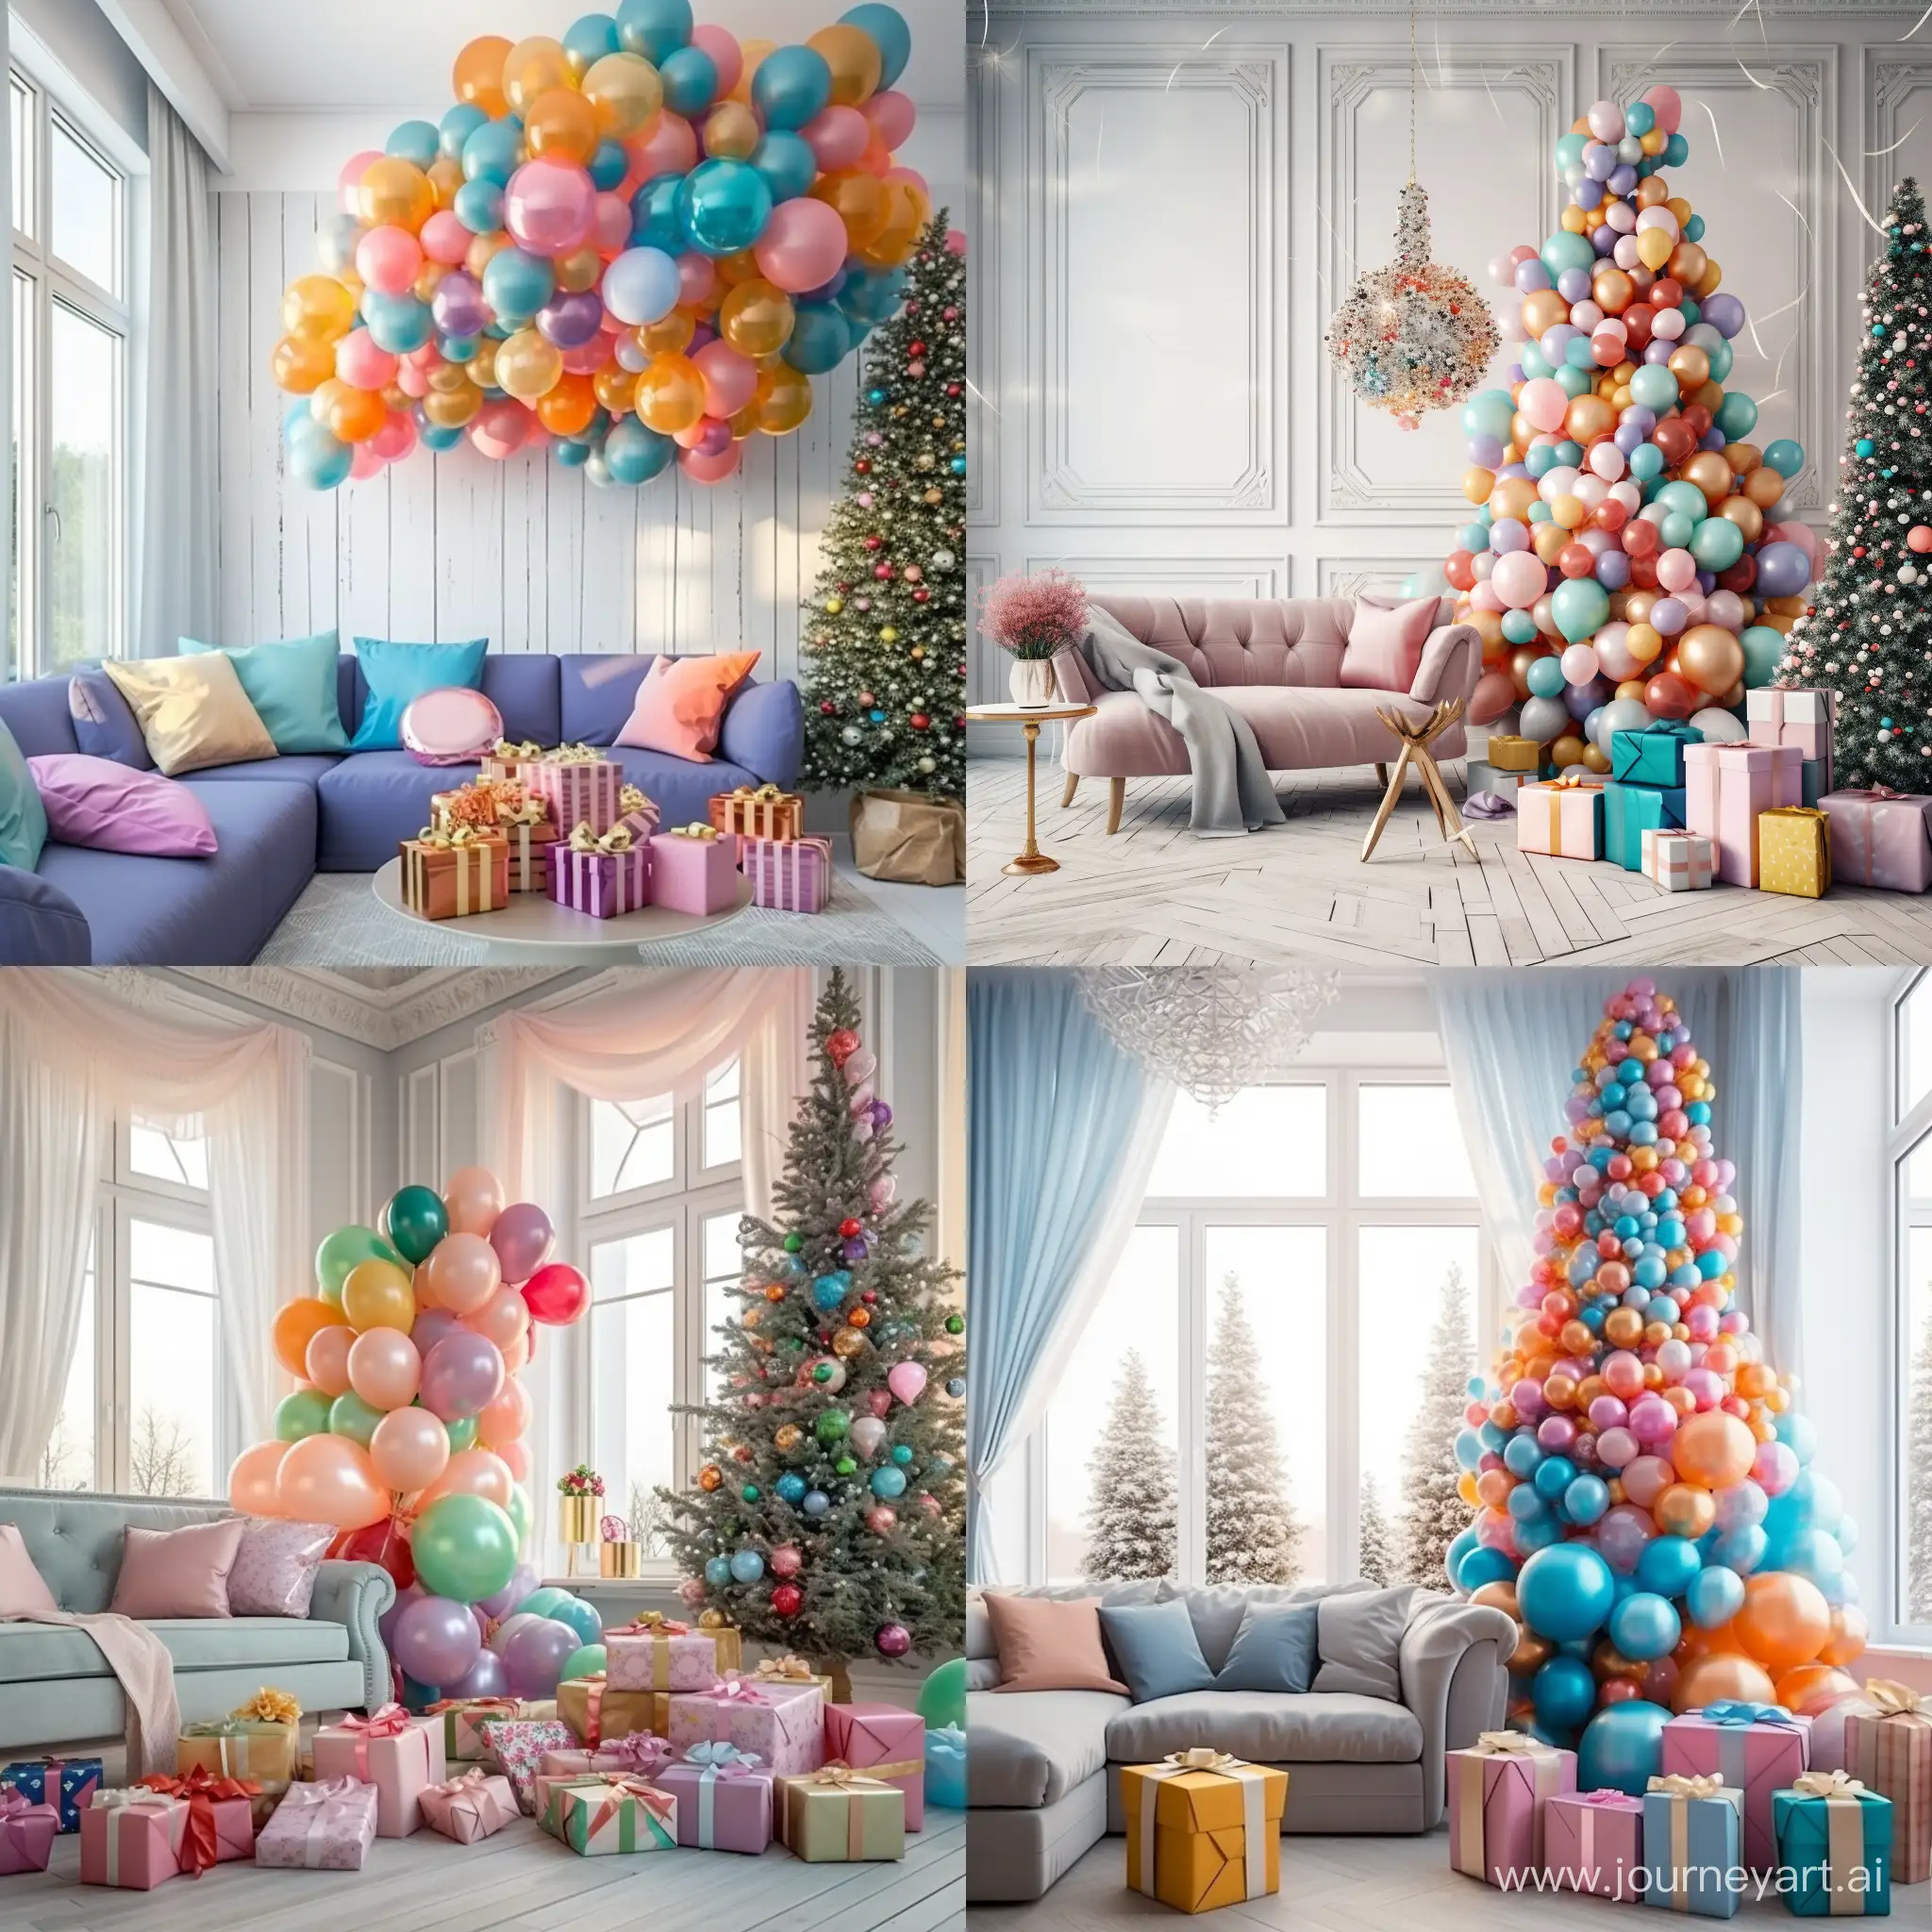 Festive-Christmas-Day-Room-with-Colorful-Balloons-and-Gifts